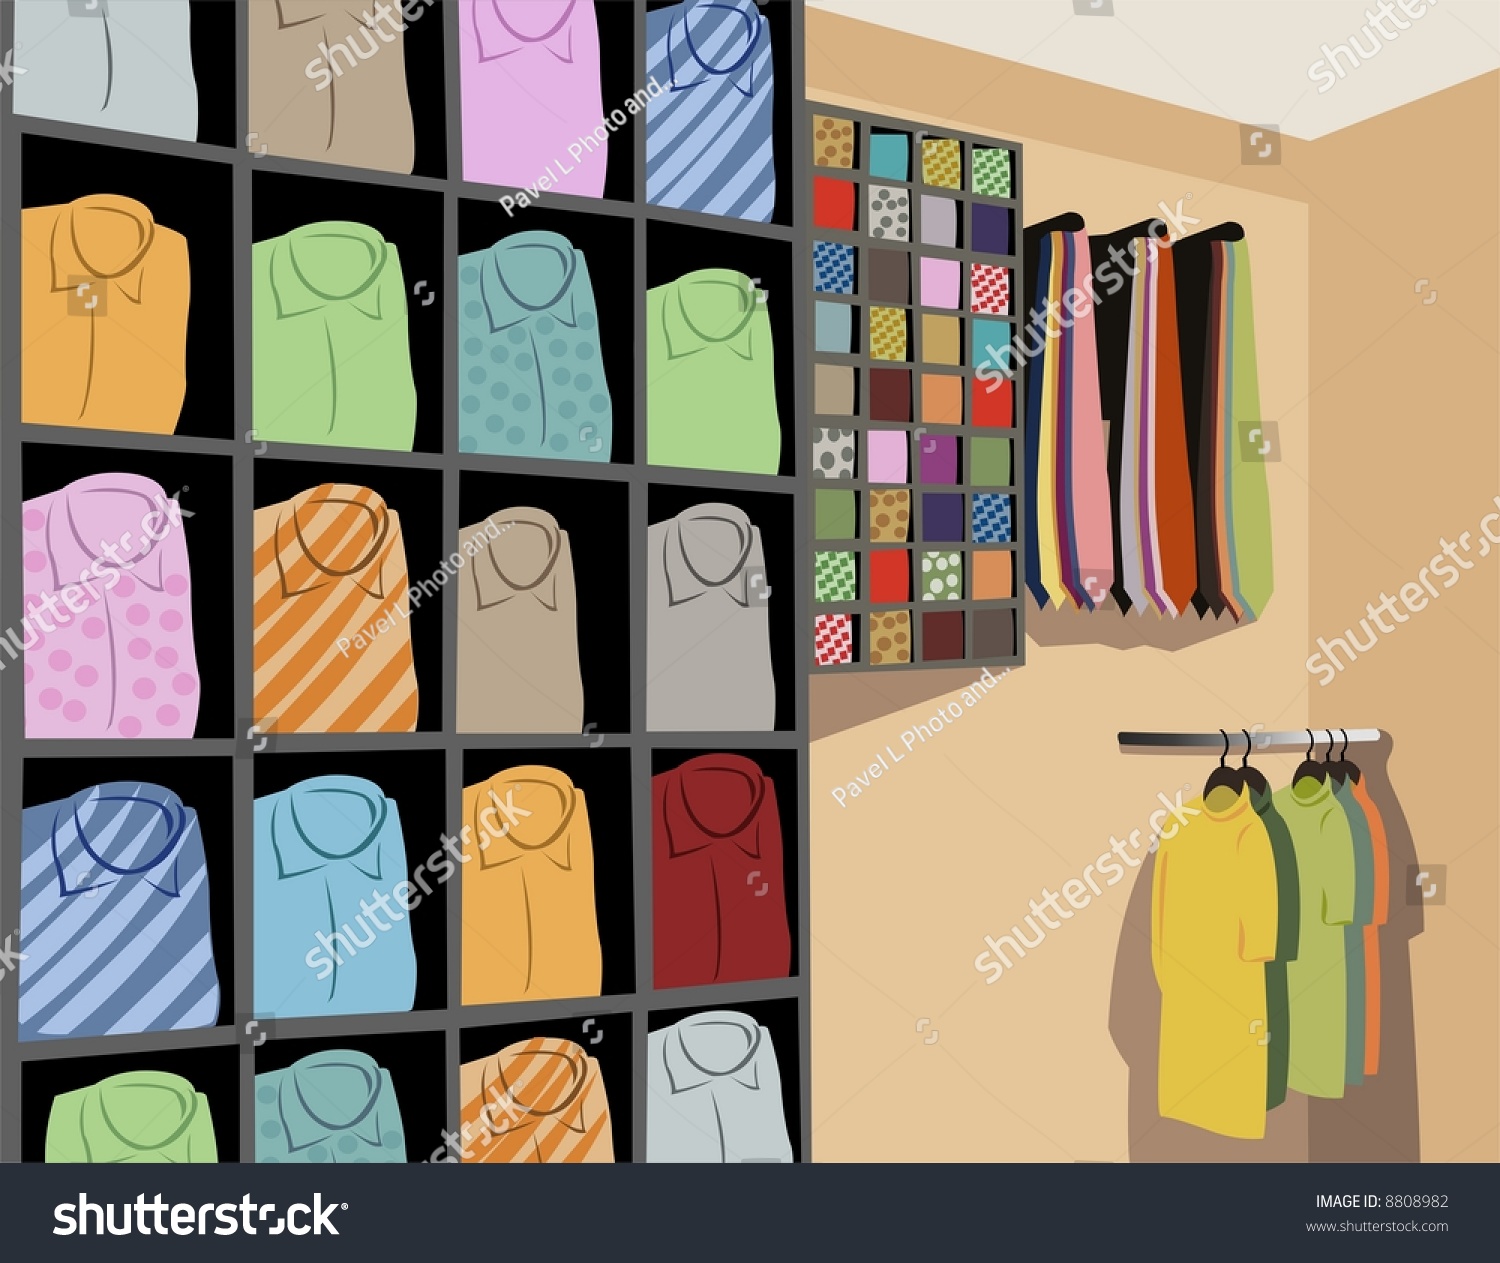 Shirts In Store Vector - 8808982 : Shutterstock